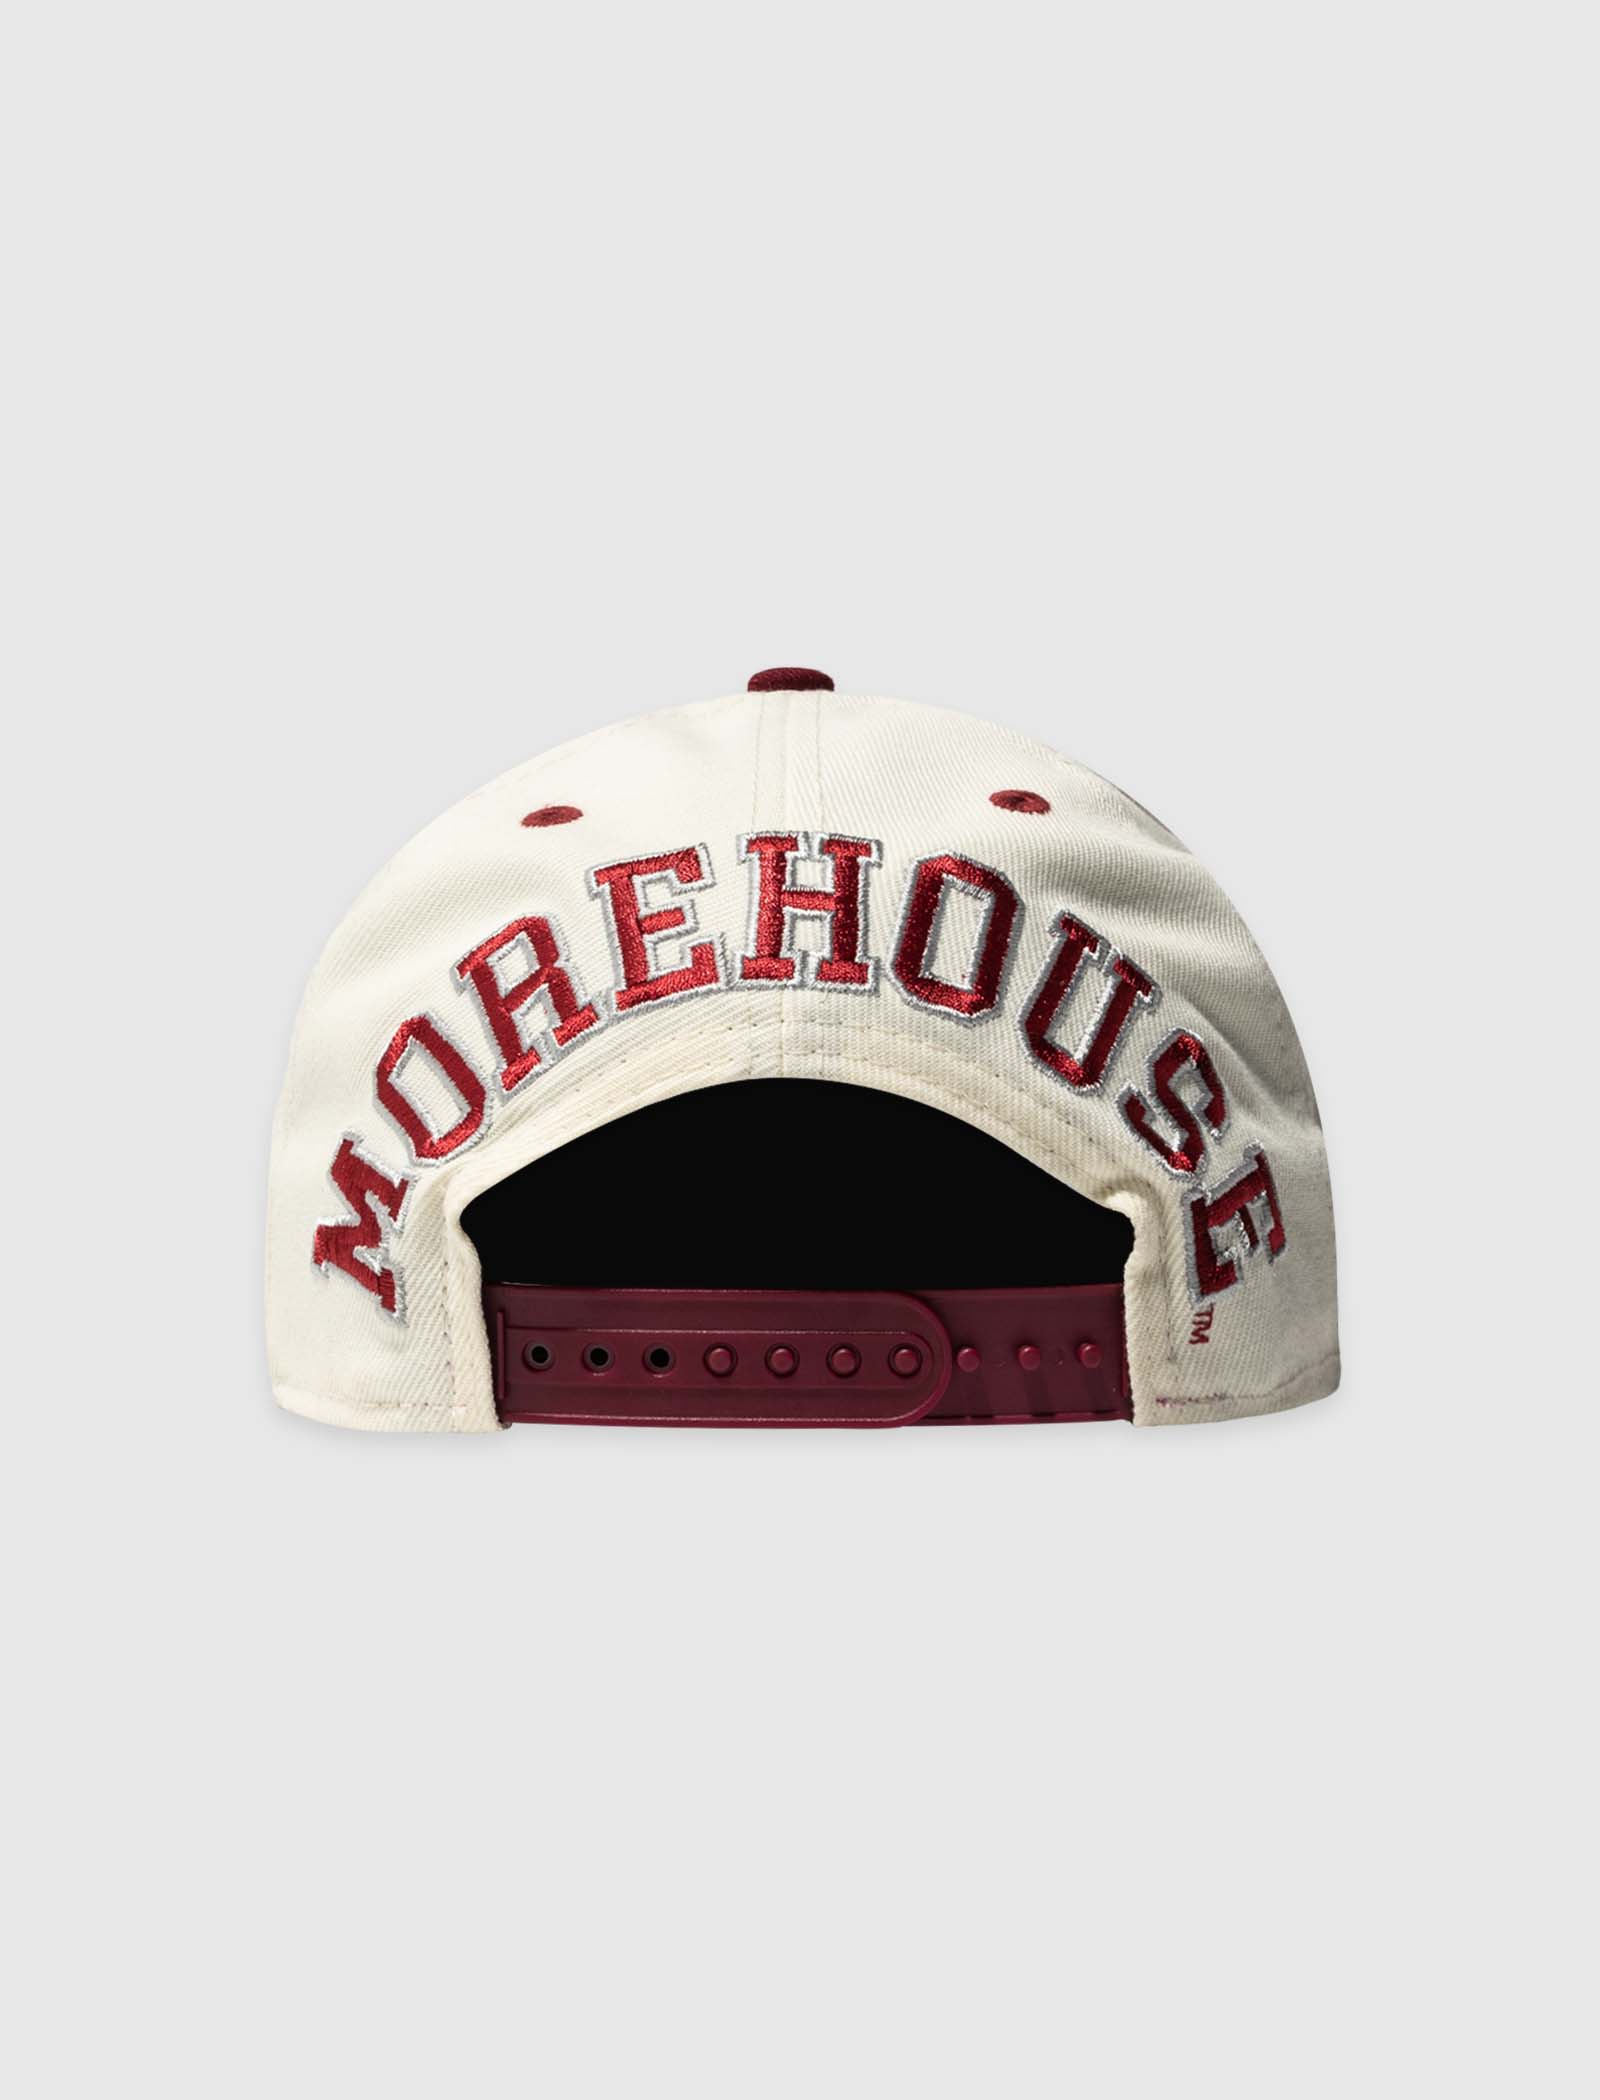 MOREHOUSE TIGERS SNAPBACK HAT